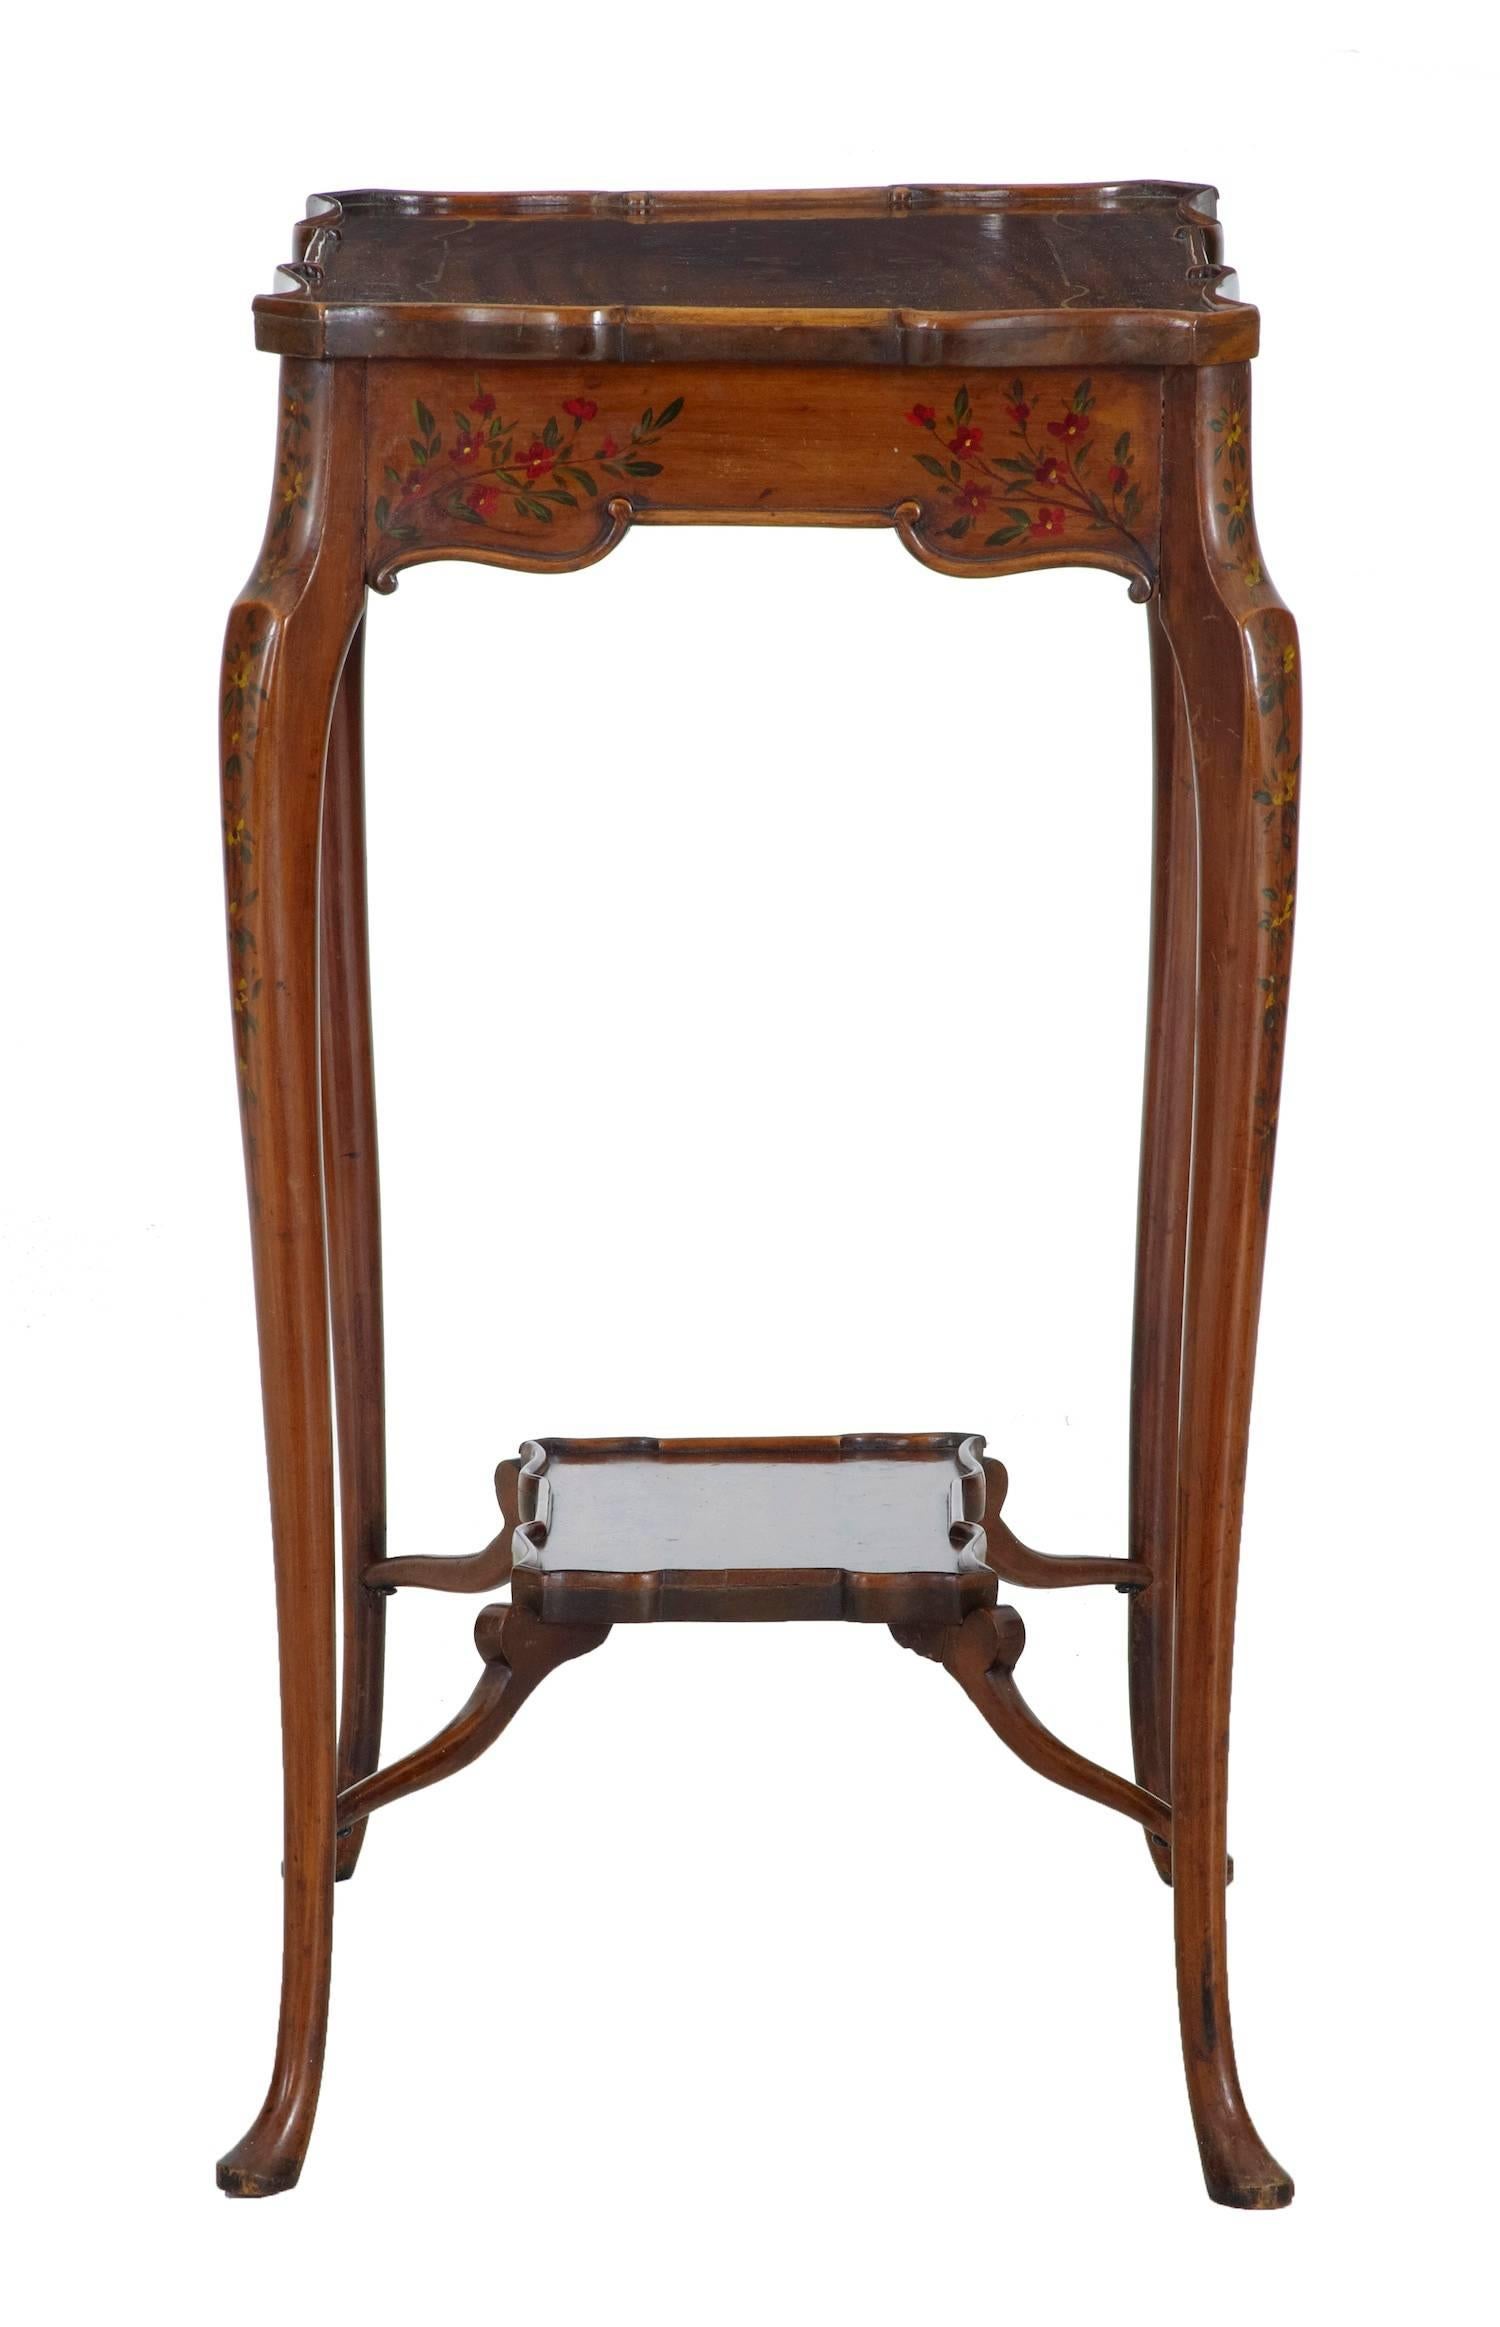 English Sheraton Revival side table, circa 1905.
Delicately hand-painted all-over.
Shaped scalloped top which is echoed by a second tier below.
Standing on pad foot.
Some natural fading, minor marks to woodwork.
Measures: Height: 26